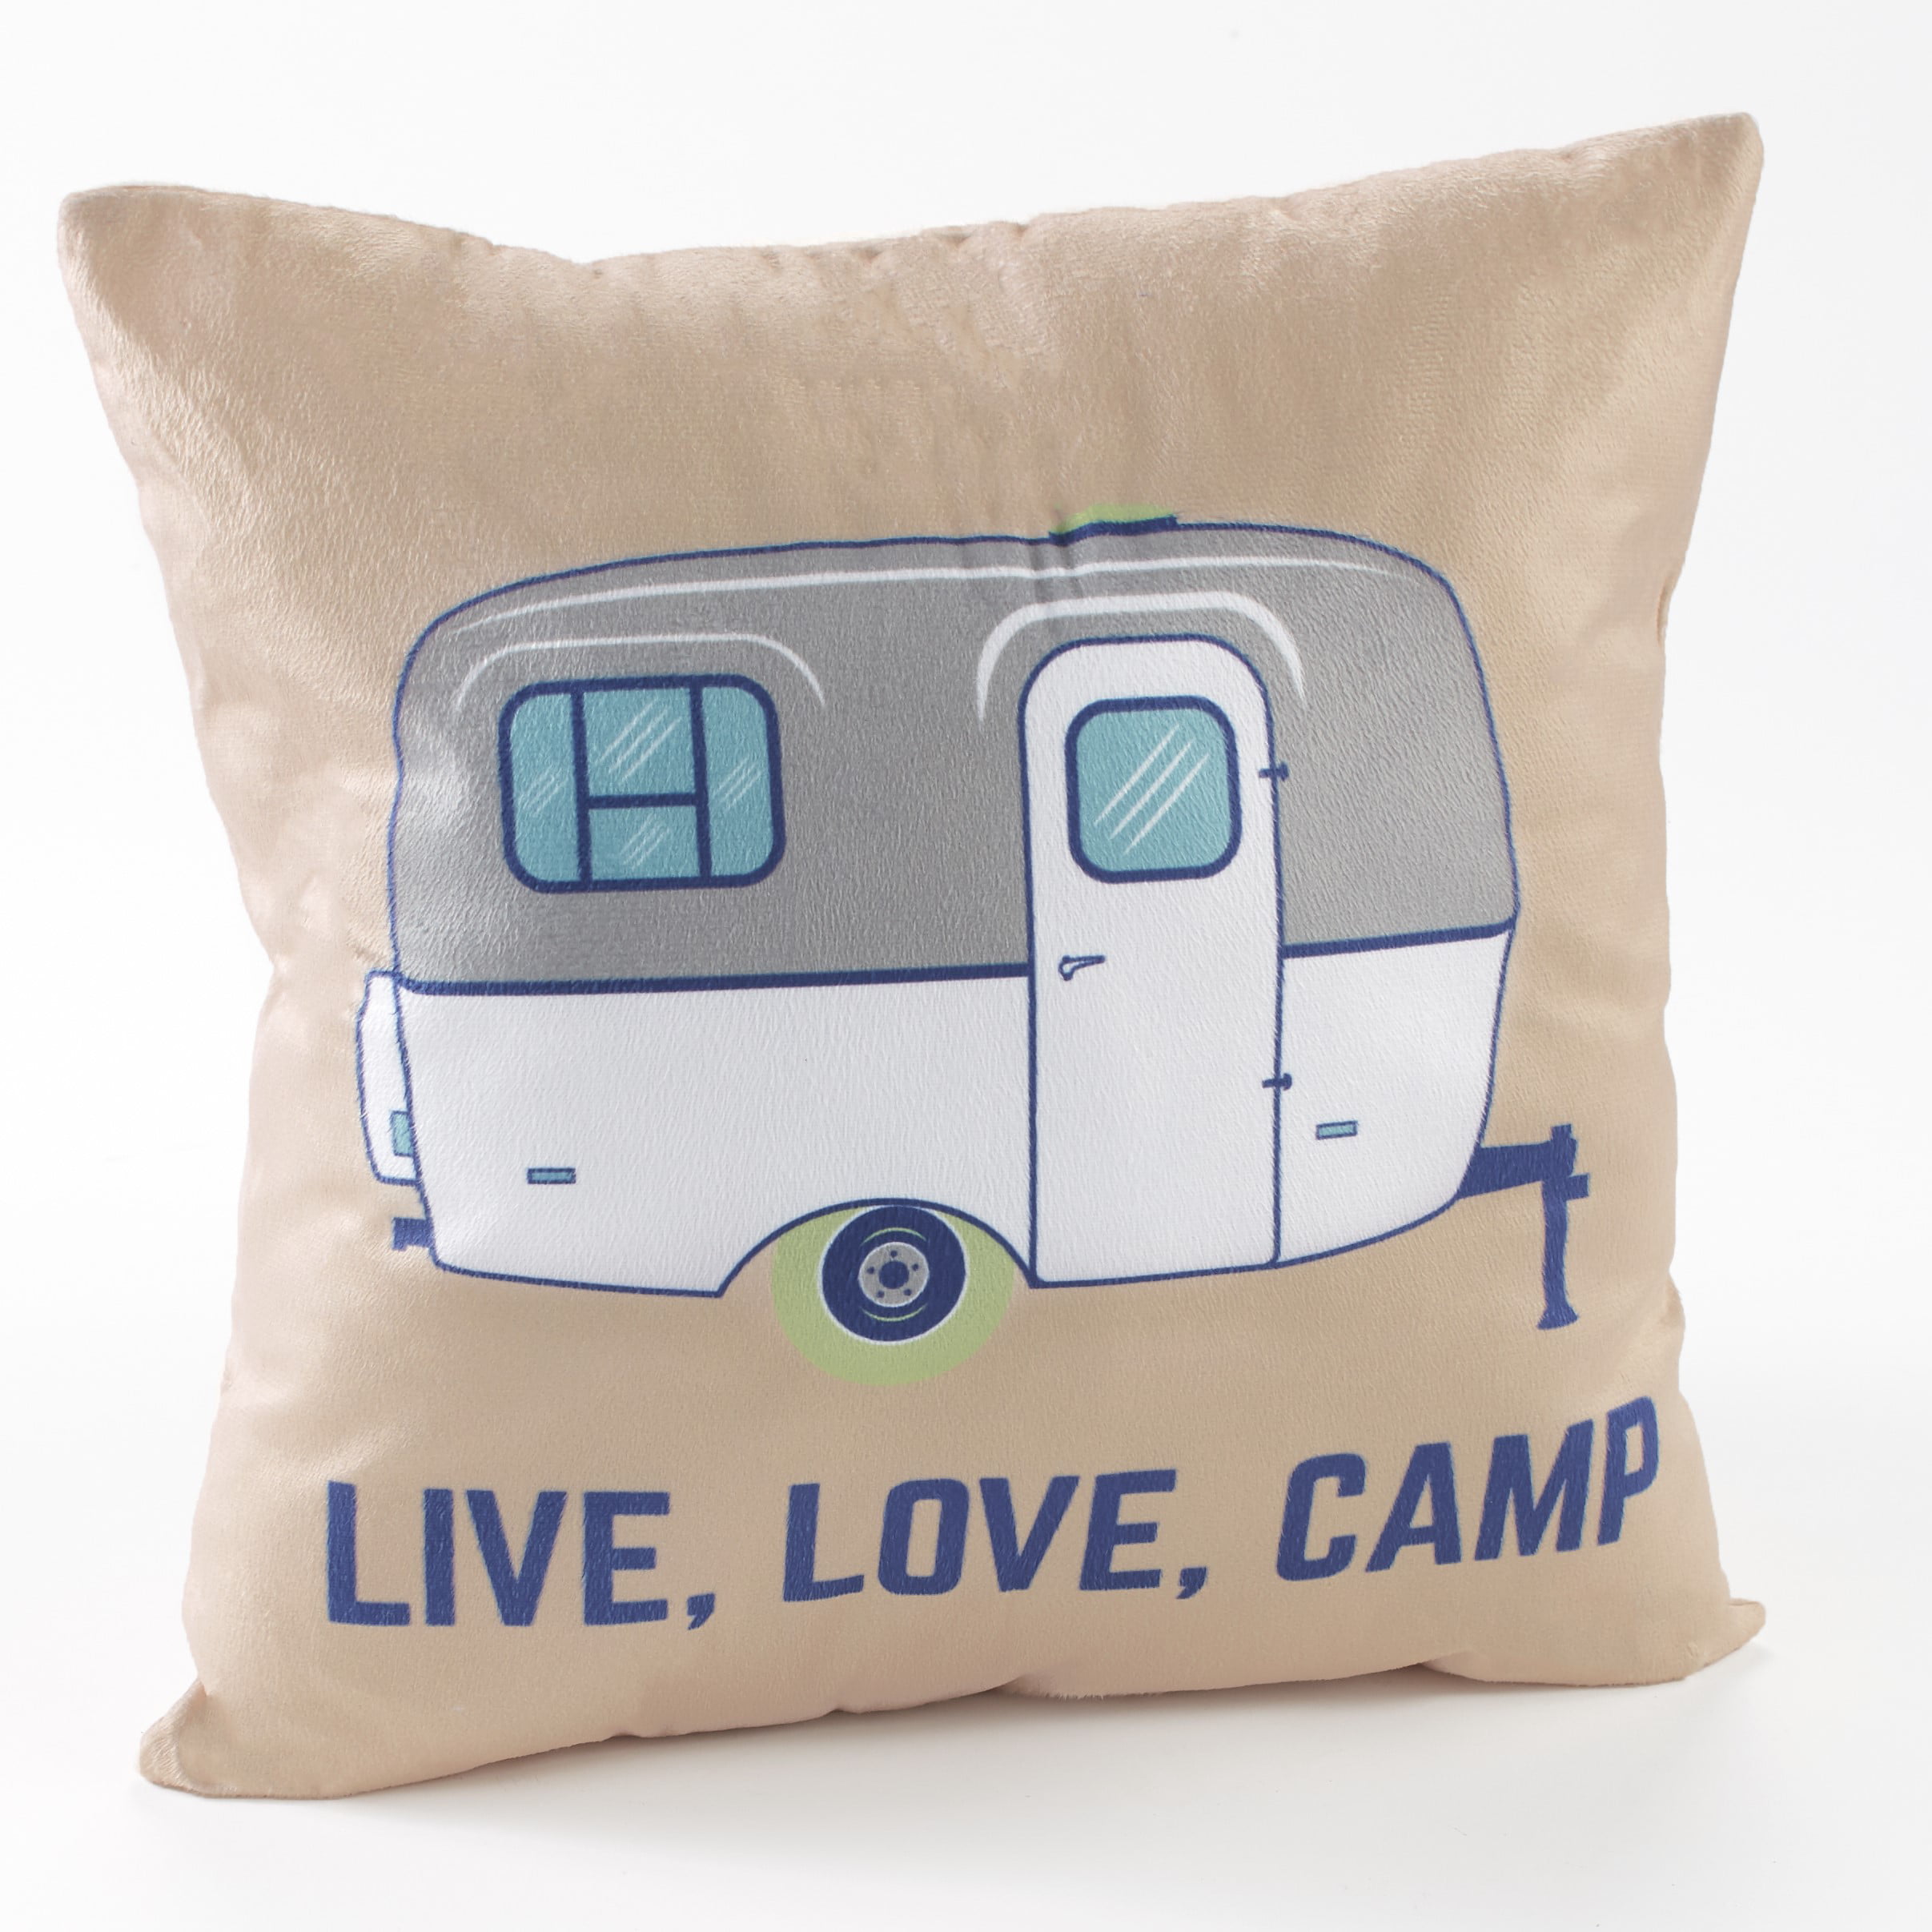 16x16 Trendy Fun Cool Gifts The Best Memories are Made Camping RV Adventure Travel Throw Pillow Multicolor